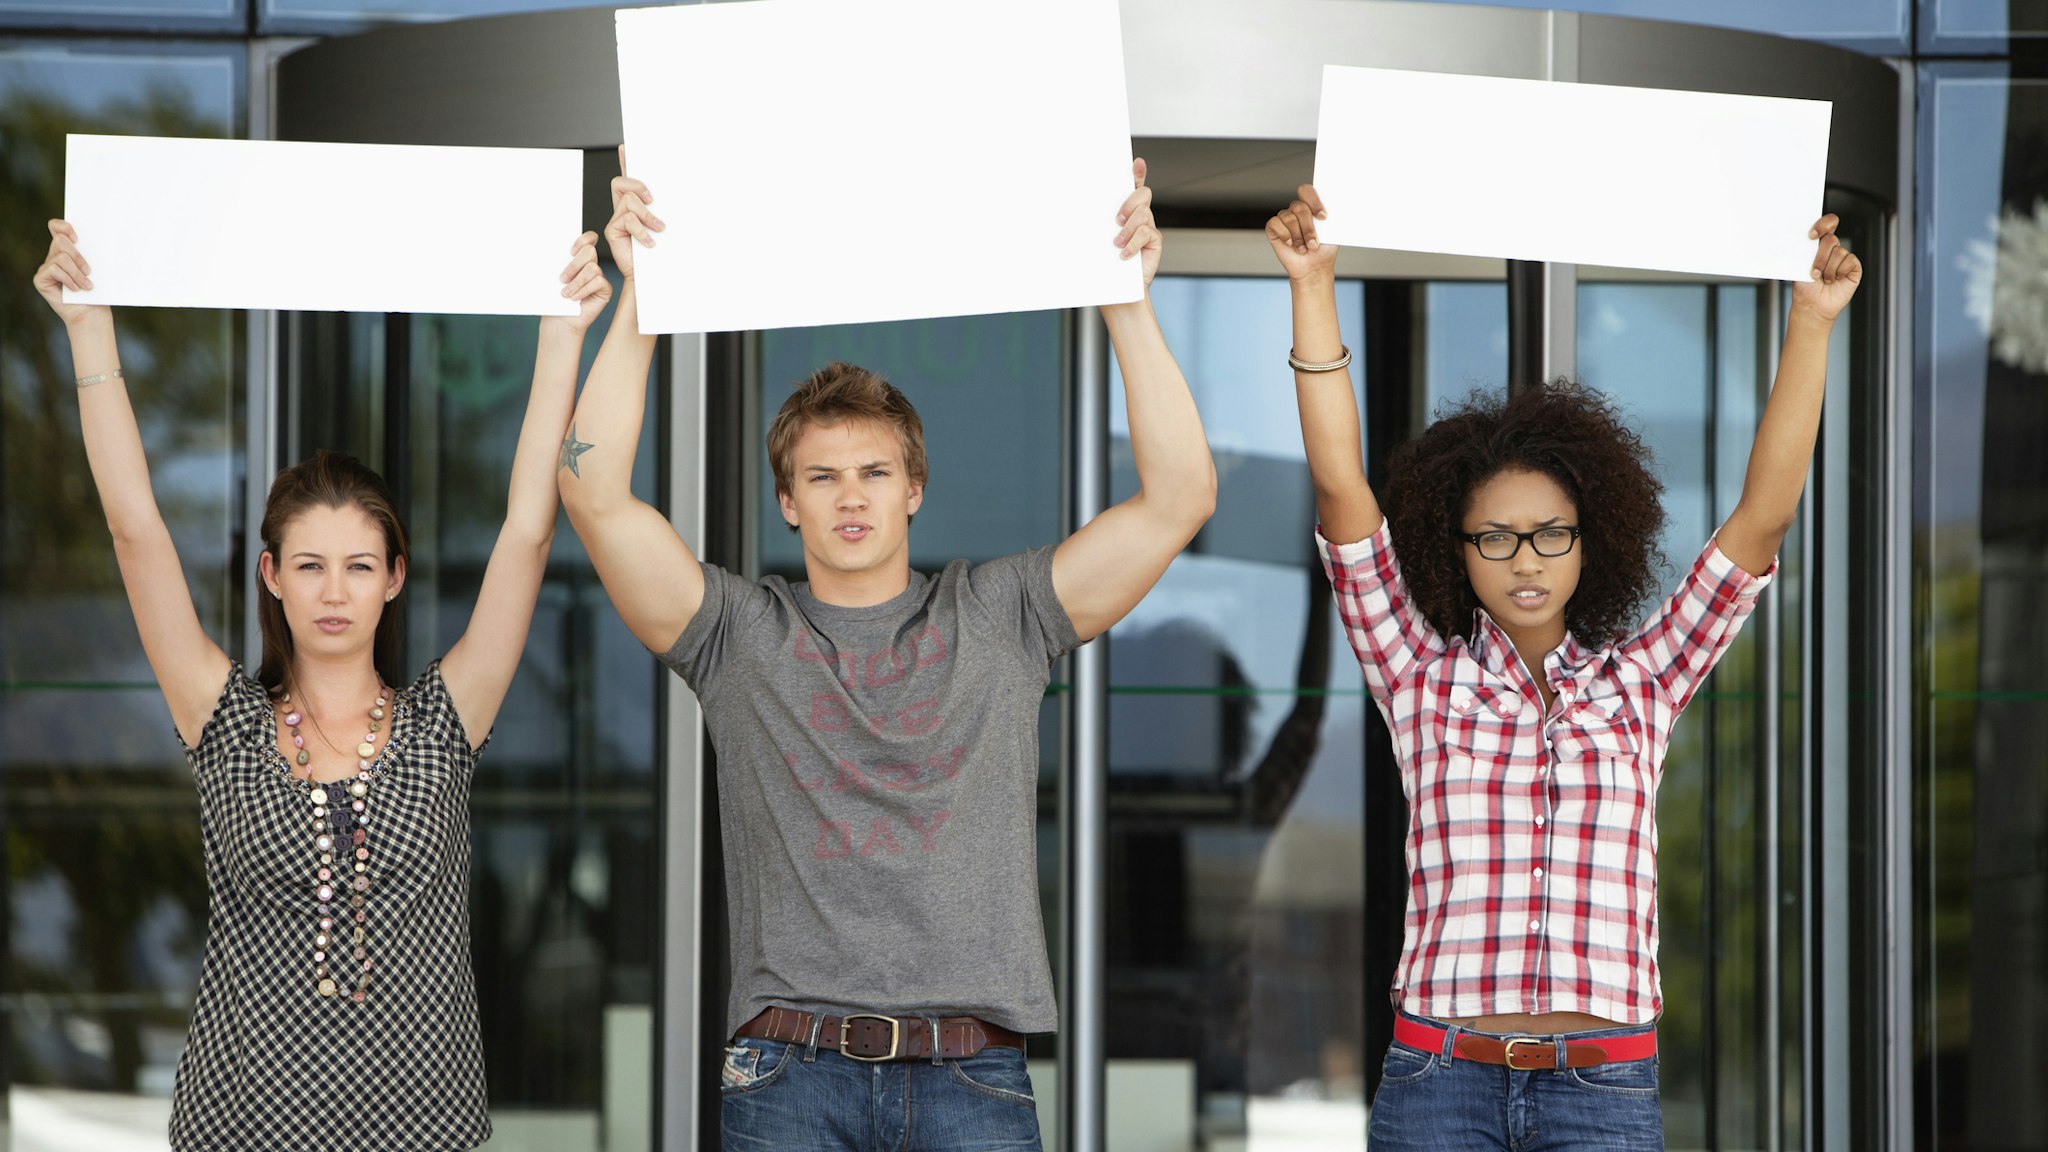 Three friends protesting with blank placards - stock photo